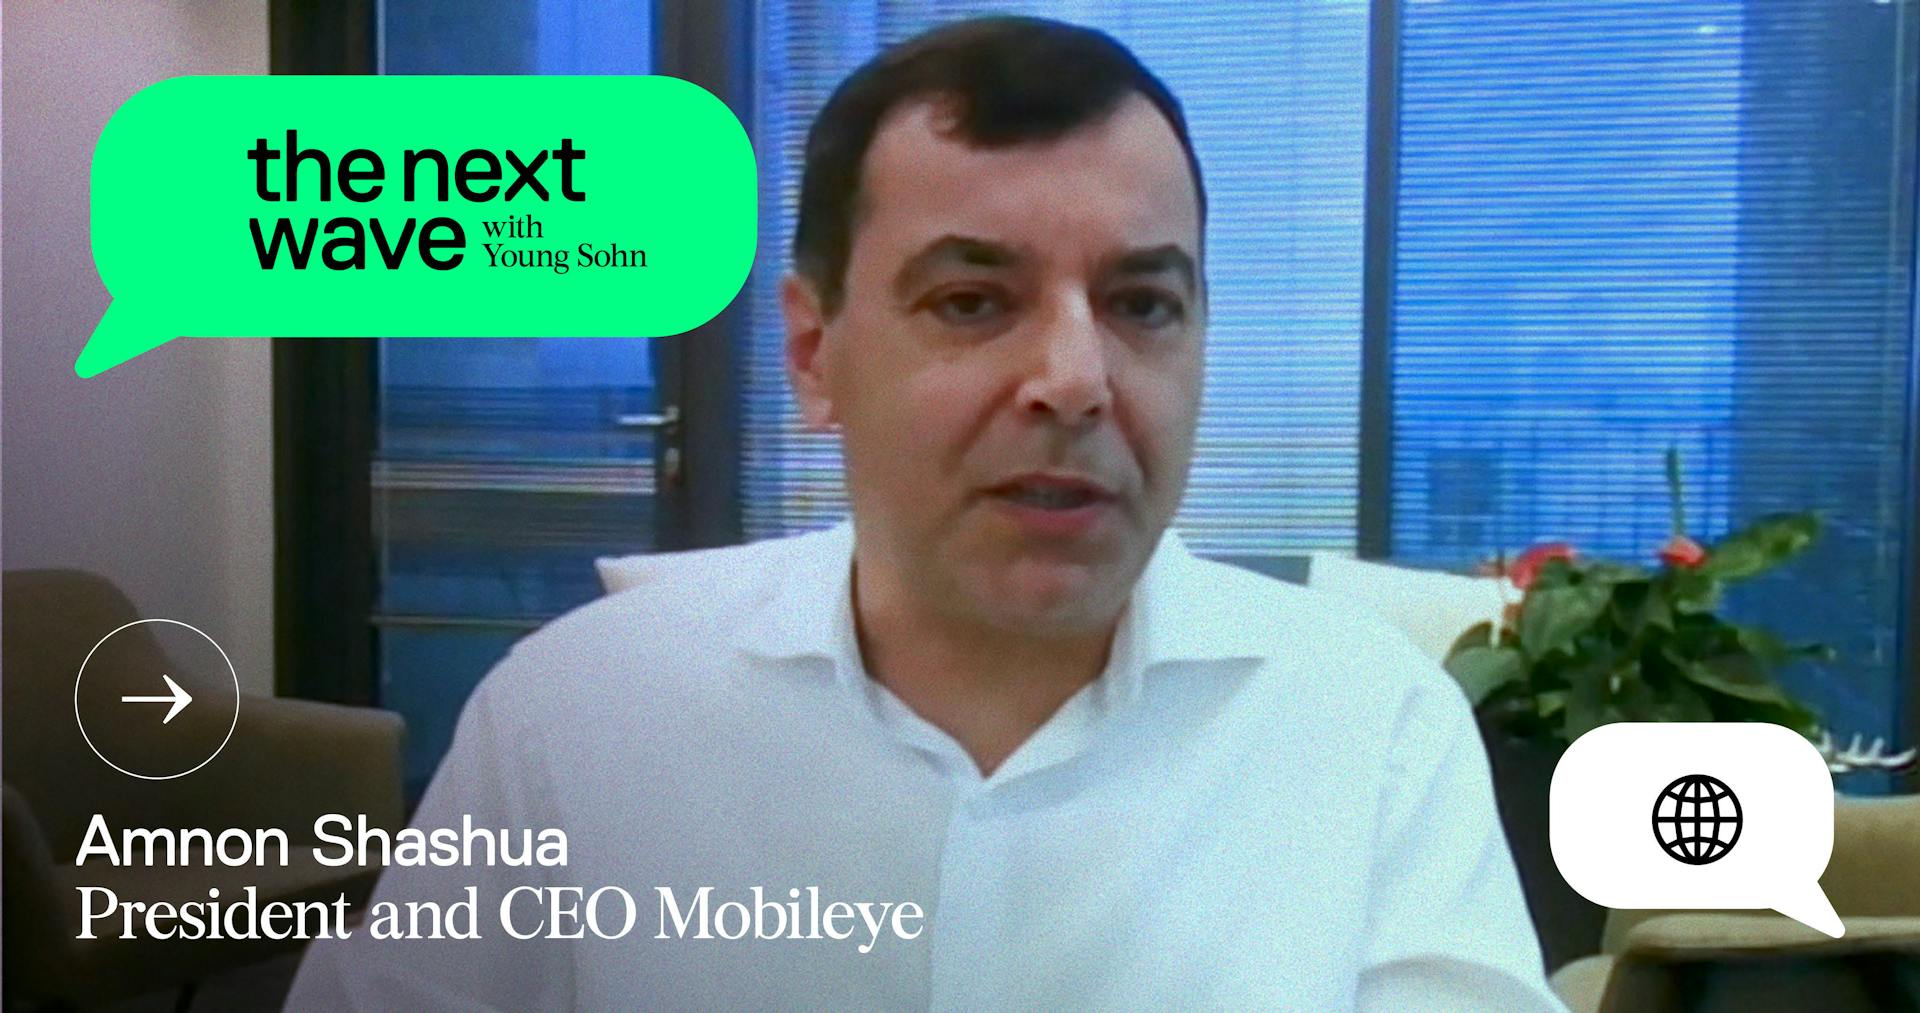 Driving into the Future from Autonomous to AI with Amnon Shashua, CEO of Mobileye and co-founder of AI21 Labs